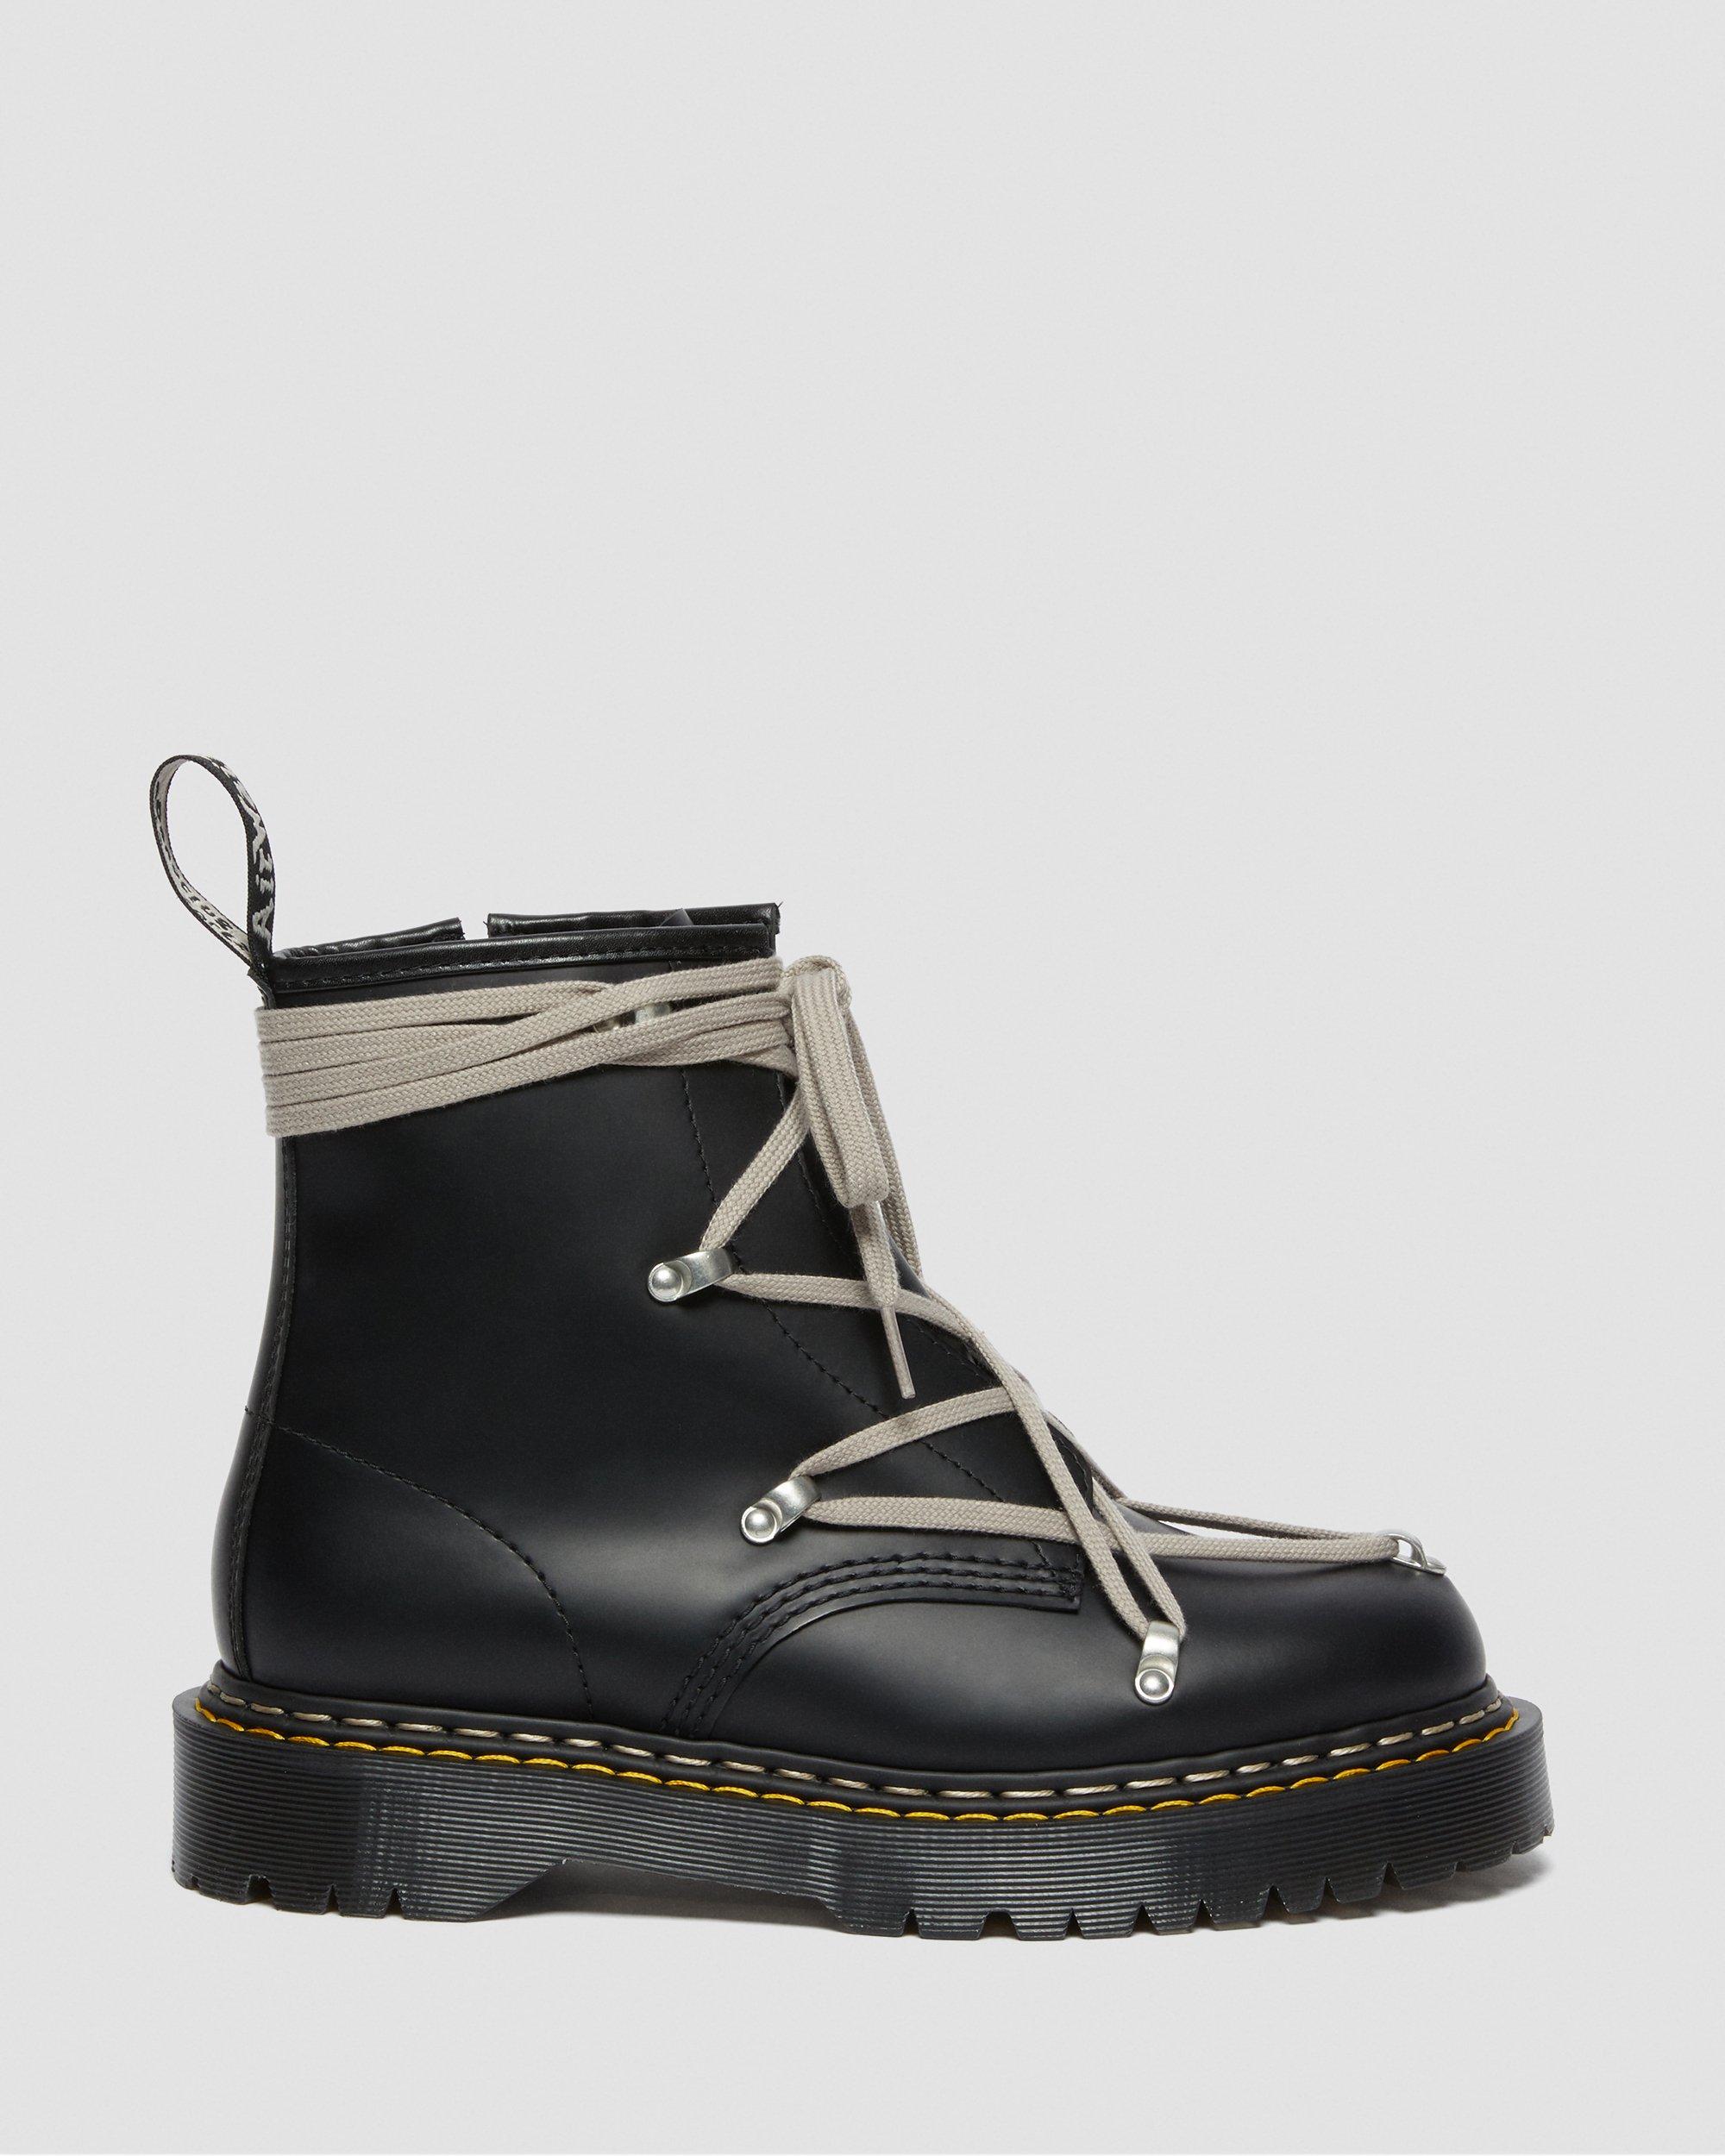 https://i1.adis.ws/i/drmartens/27019001.88.jpg?$large$1460 Bex Rick Owens Laced Ankle Boots Dr. Martens